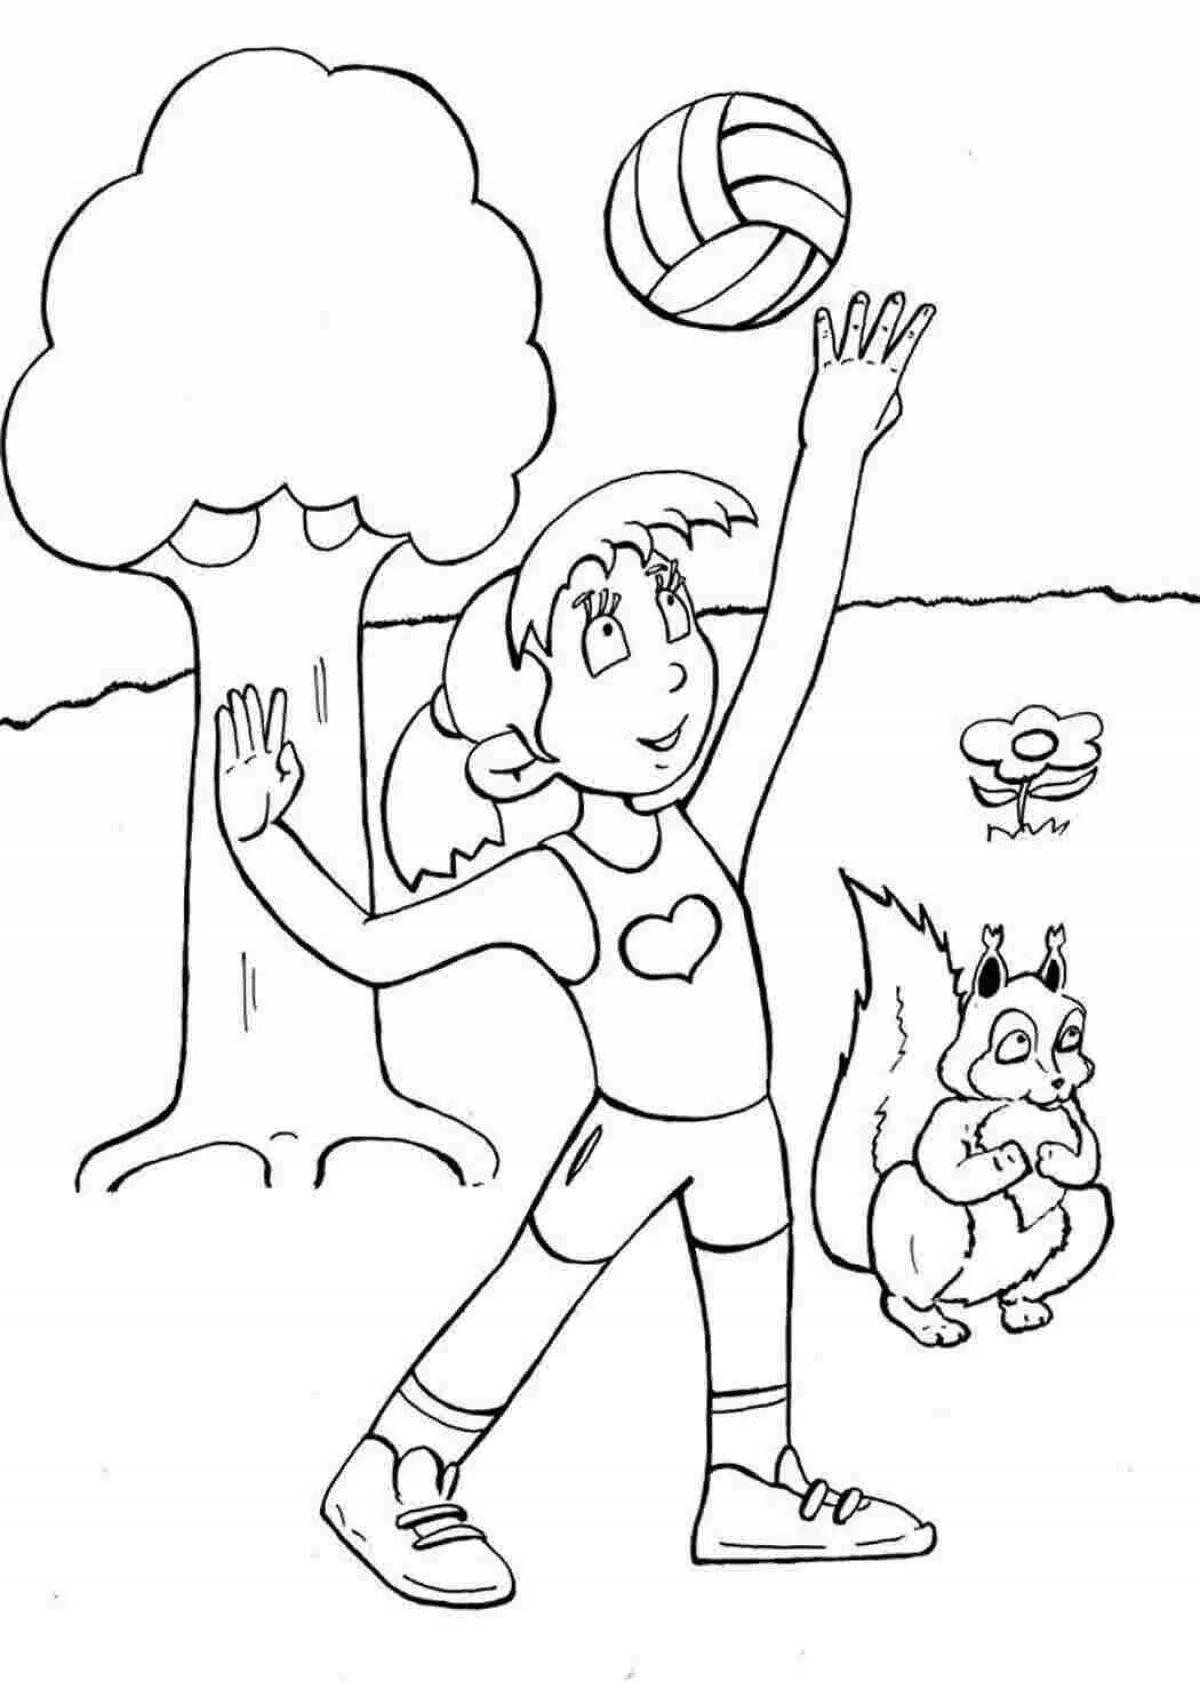 Radiant health coloring page